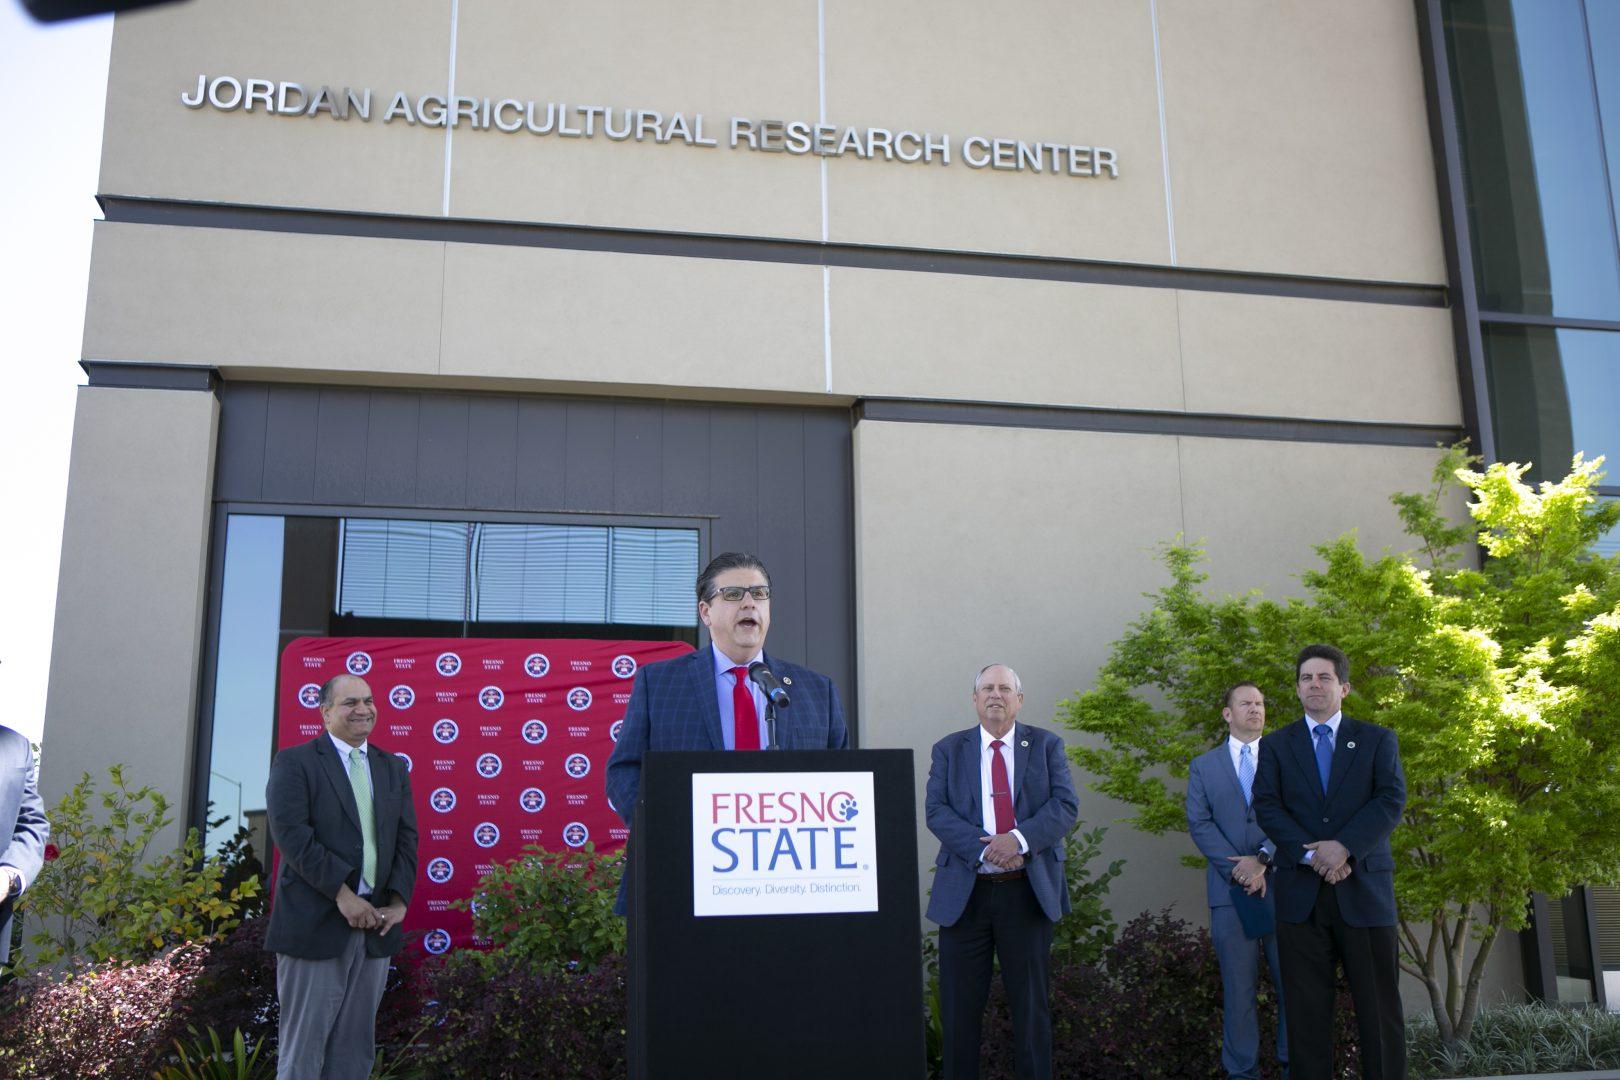 Fresno+State+President+Dr.+Joseph+I.+Castro+announces+the+new+temporary+COVID-19+public+lab+as+part+of+a+partnership+with+Fresno+county+in+front+of+the+Jordan+Agricultural+Research+Center+on+Tuesday%2C+April+14%2C+2020.+%28Larry+Valenzuela%2F+The+Collegian%29